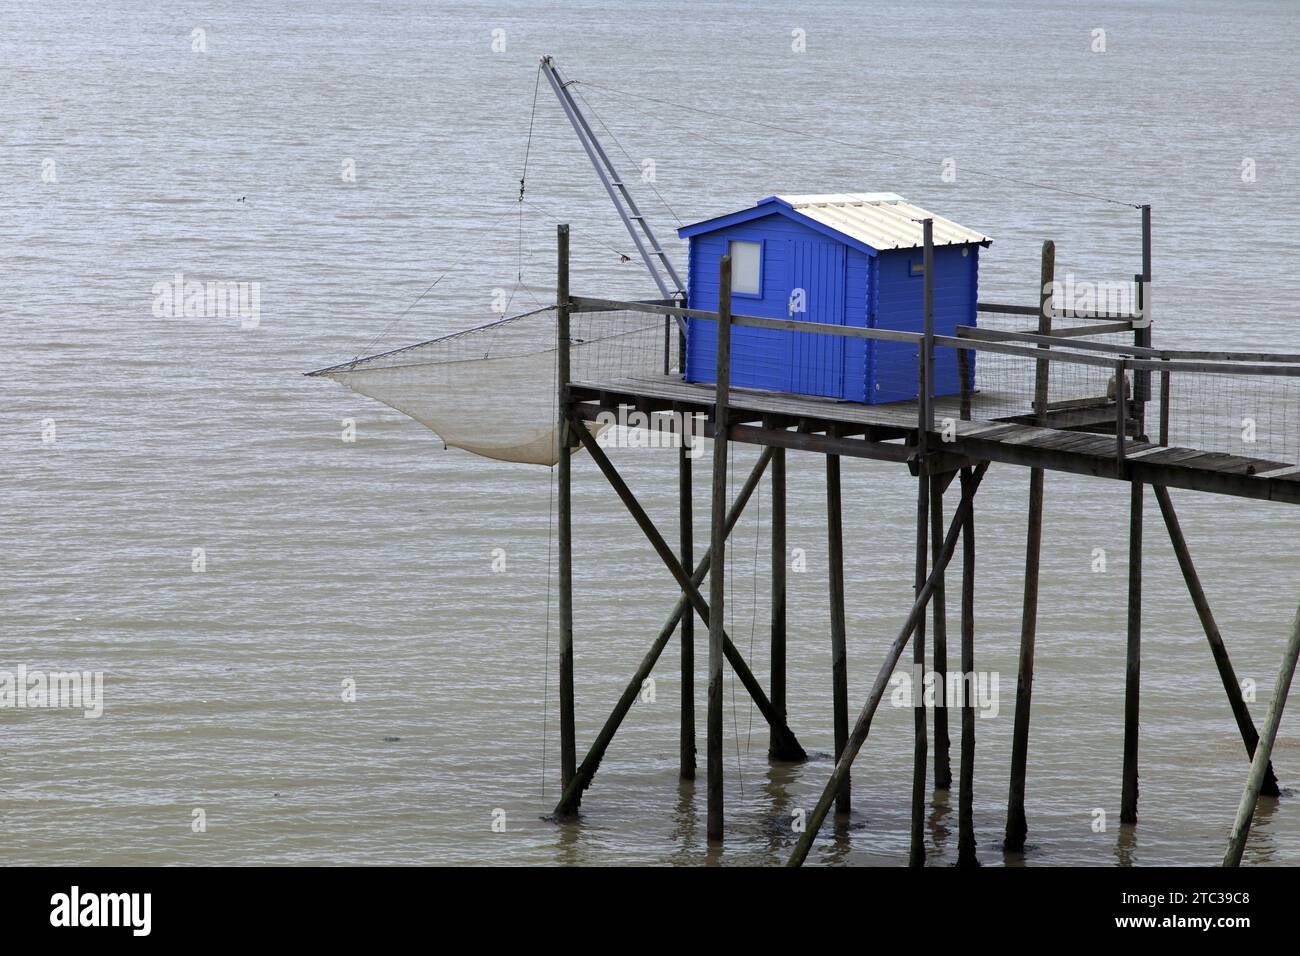 Squares and cabins mounted on stilts. Le-Port-des-Barques. Charente-Maritime, France Stock Photo